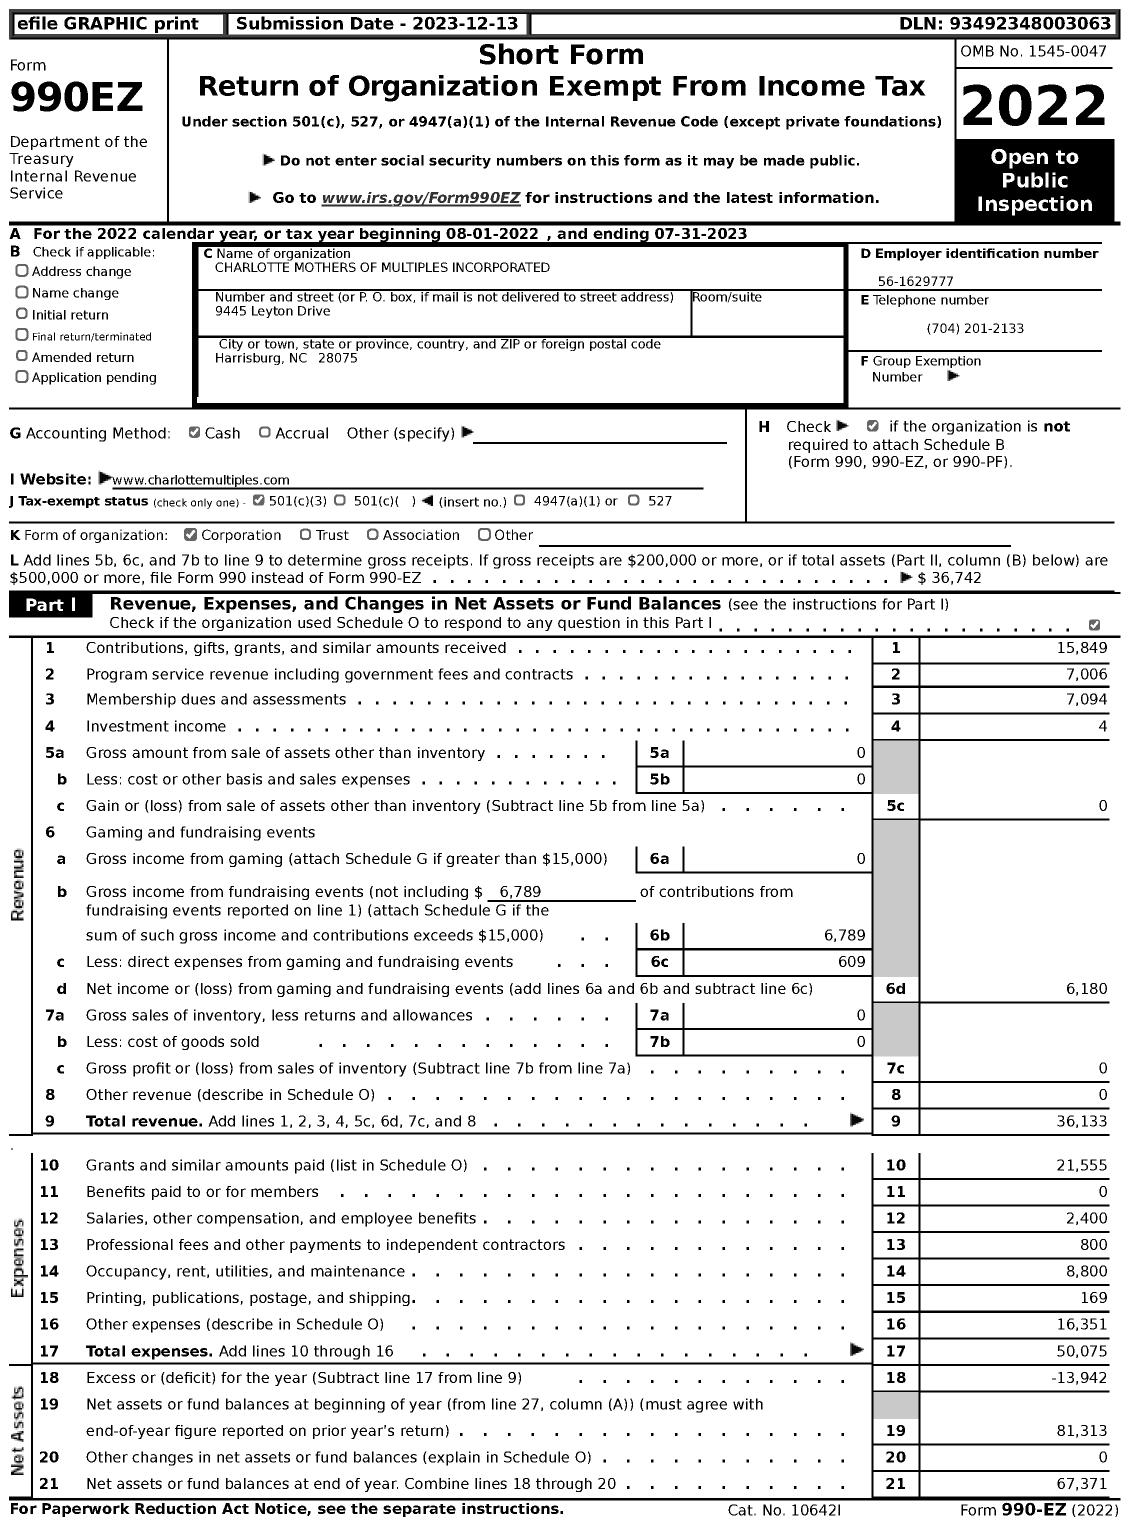 Image of first page of 2022 Form 990EZ for Charlotte Mothers of Multiples Incorporated